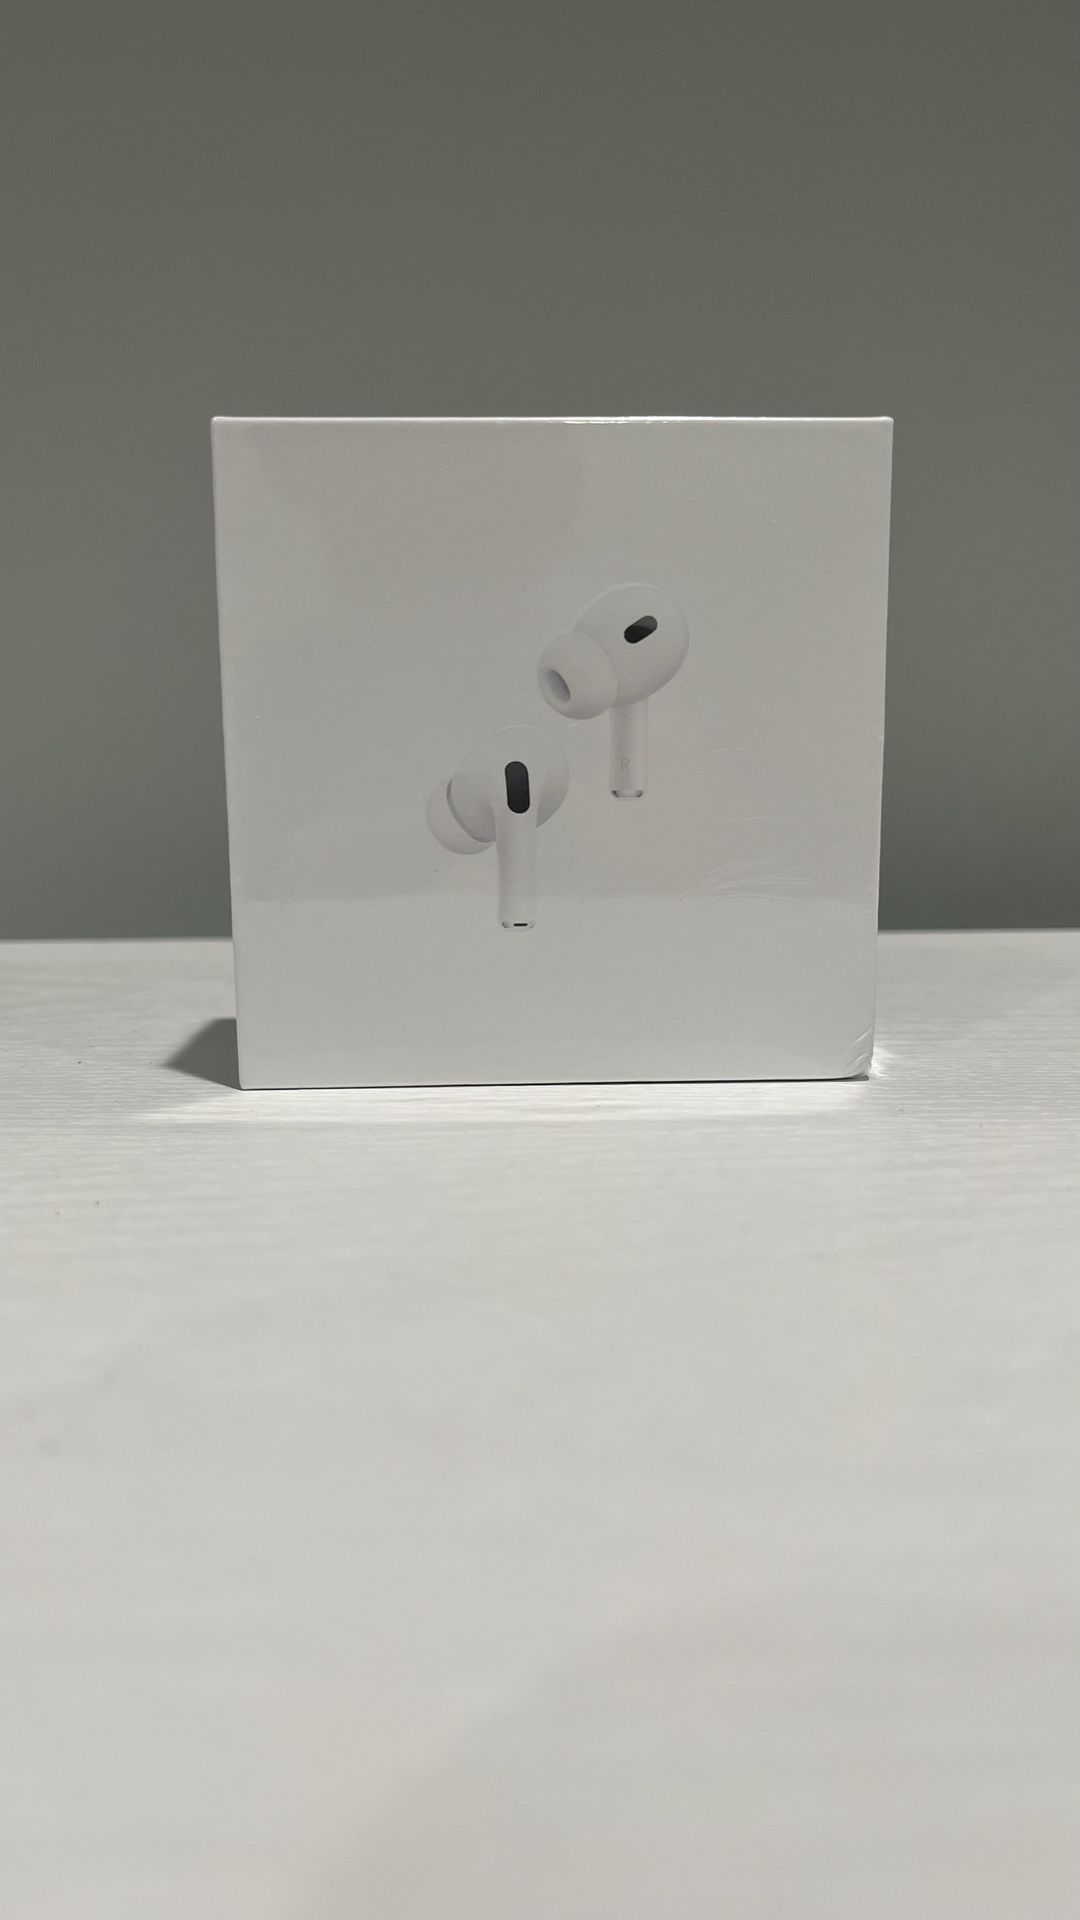 Apple Airpods Pro’s 2